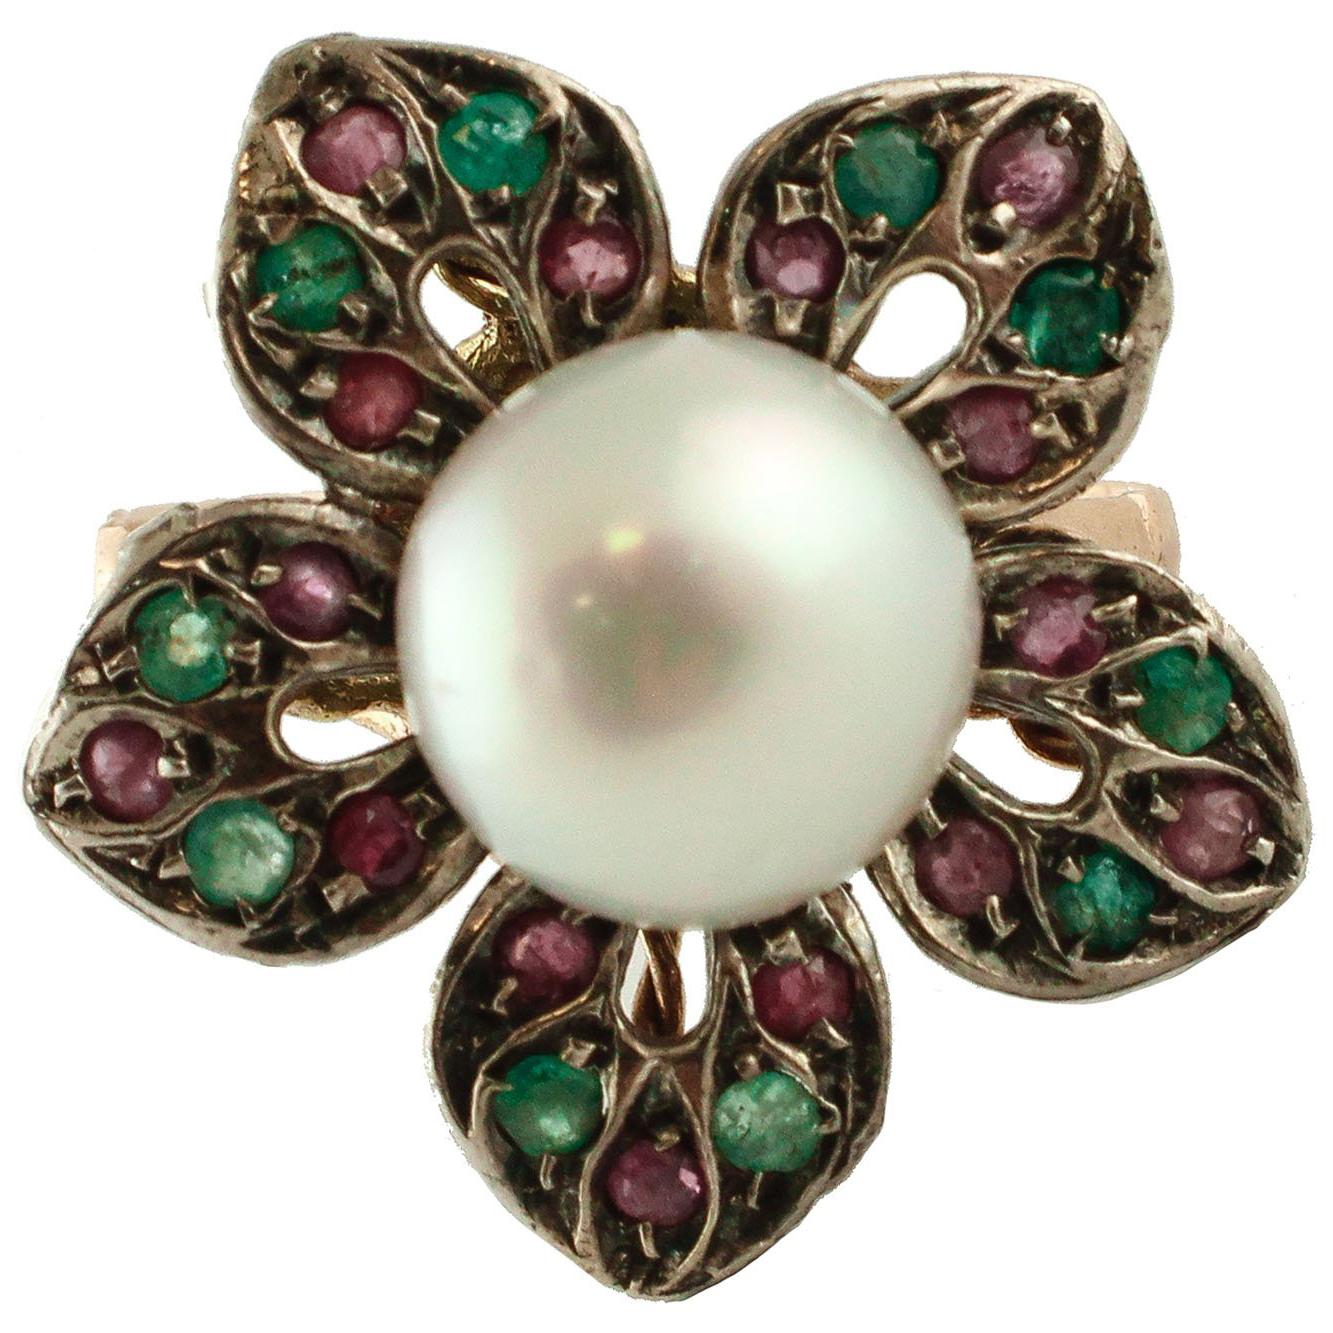  Pearl Sapphire Ruby Emerald Silver yellow Gold Ring